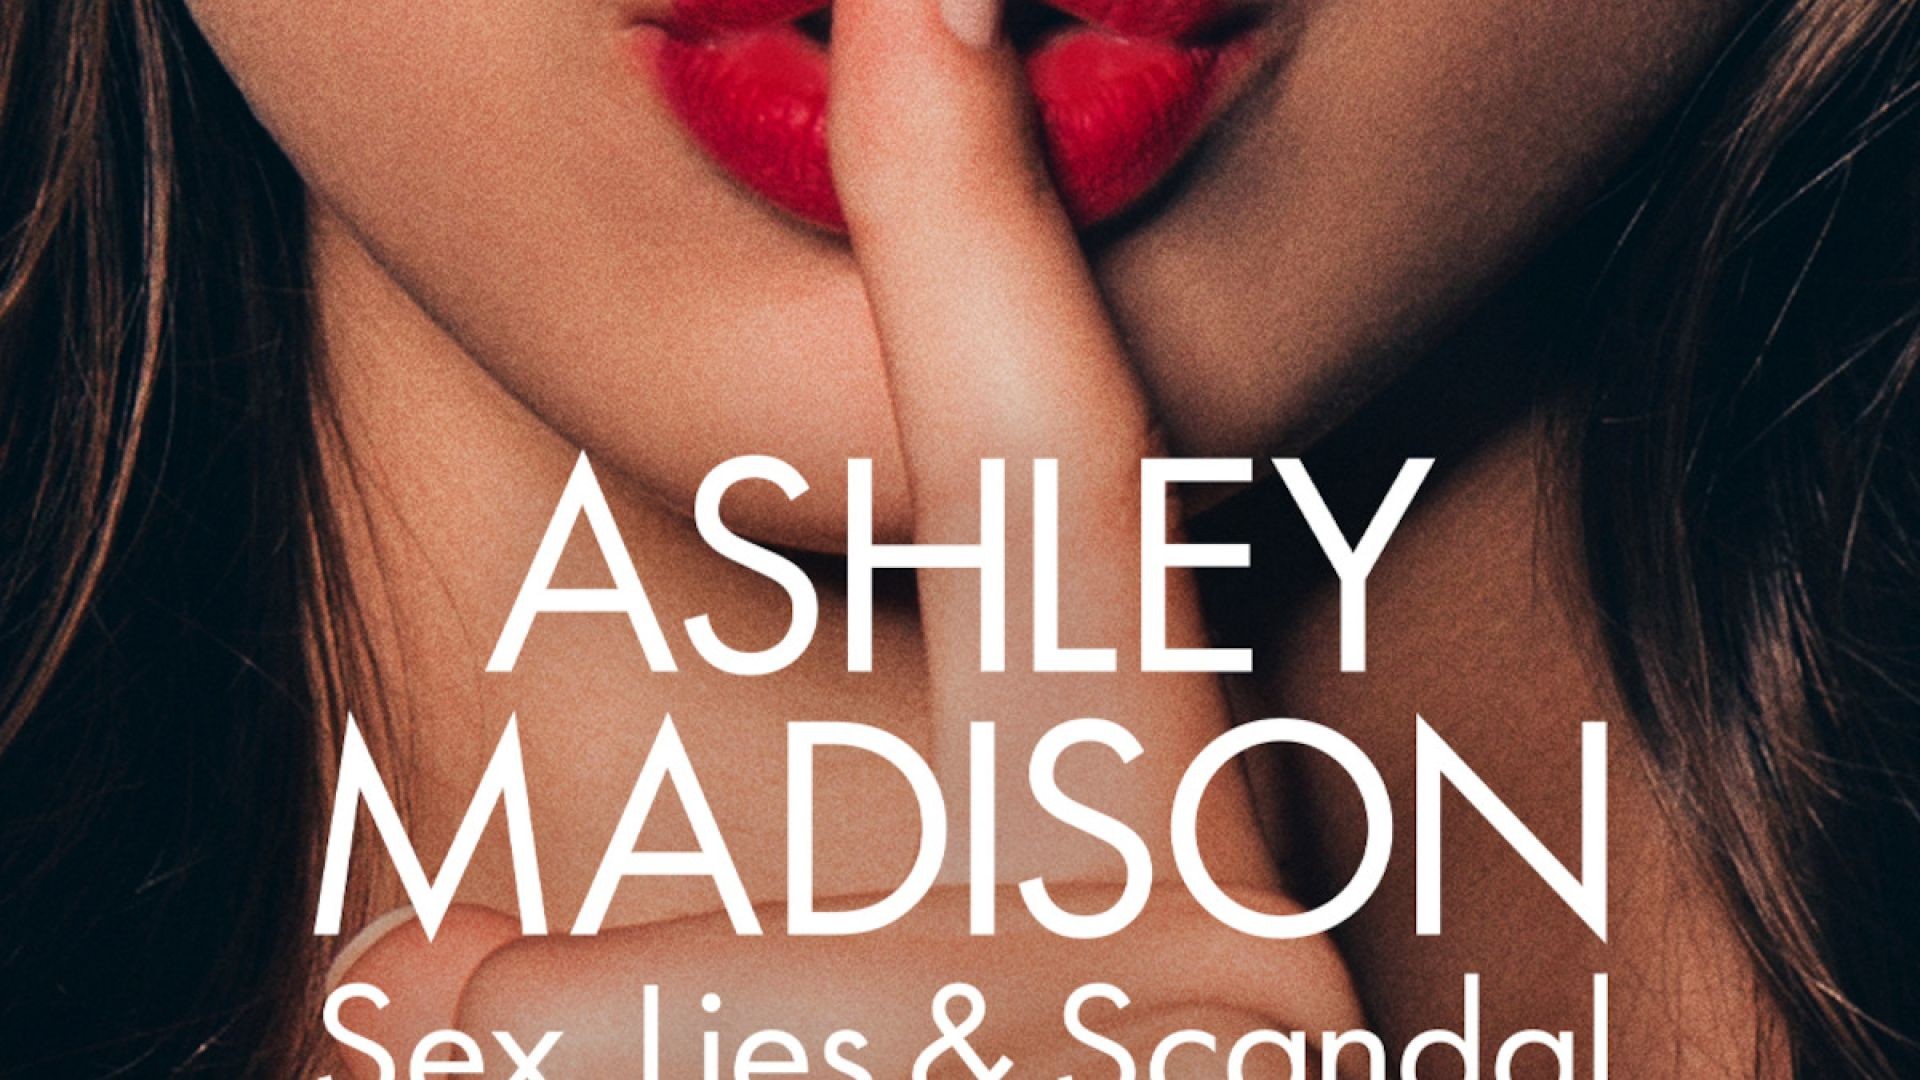 Ashley Madison: Sex, Lies & Scandal | Official Trailer